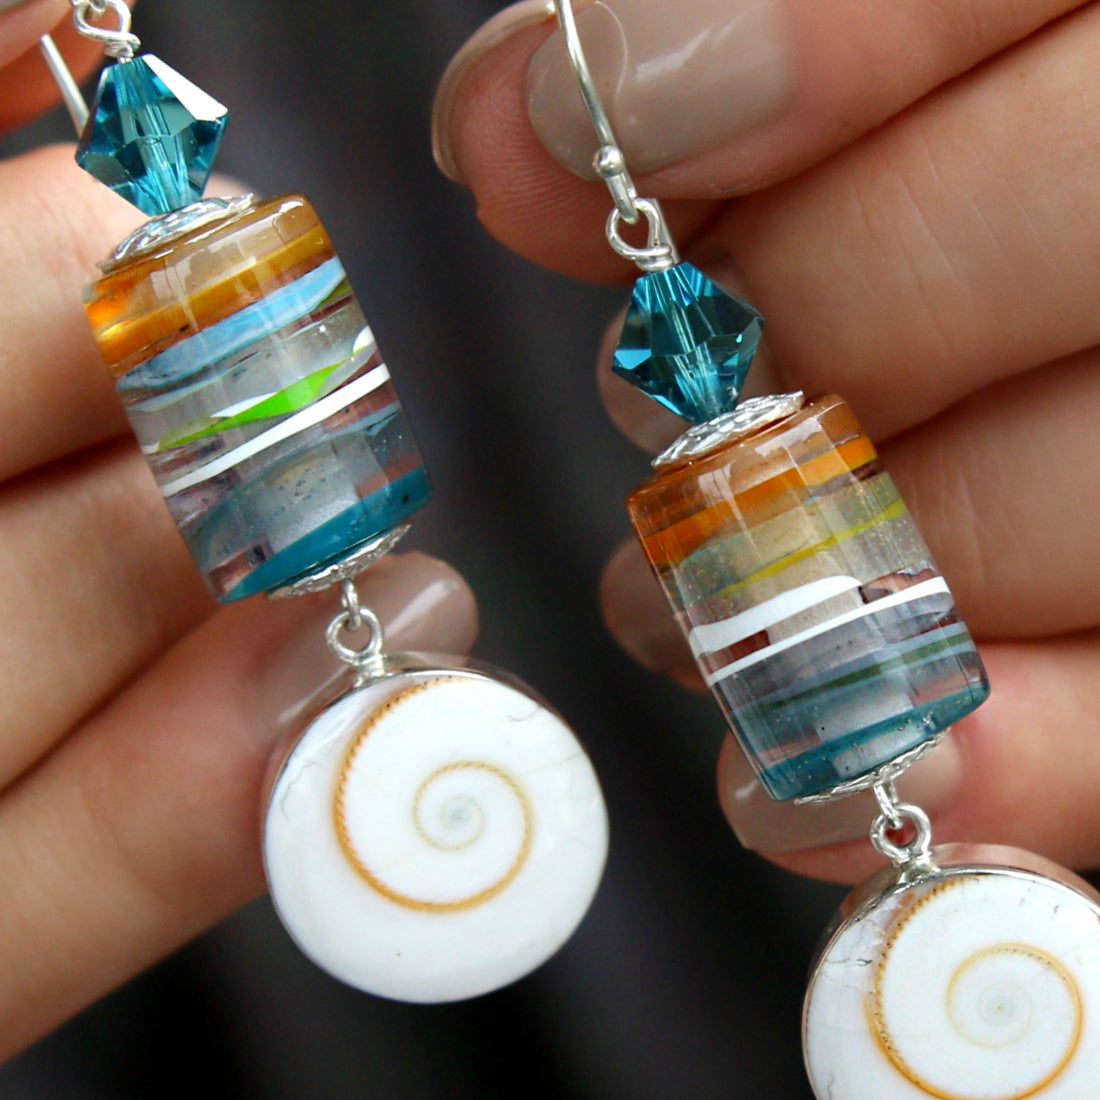 Surfite Earrings Recycled Surfboard Resin Jewelry by HappyGoLicky